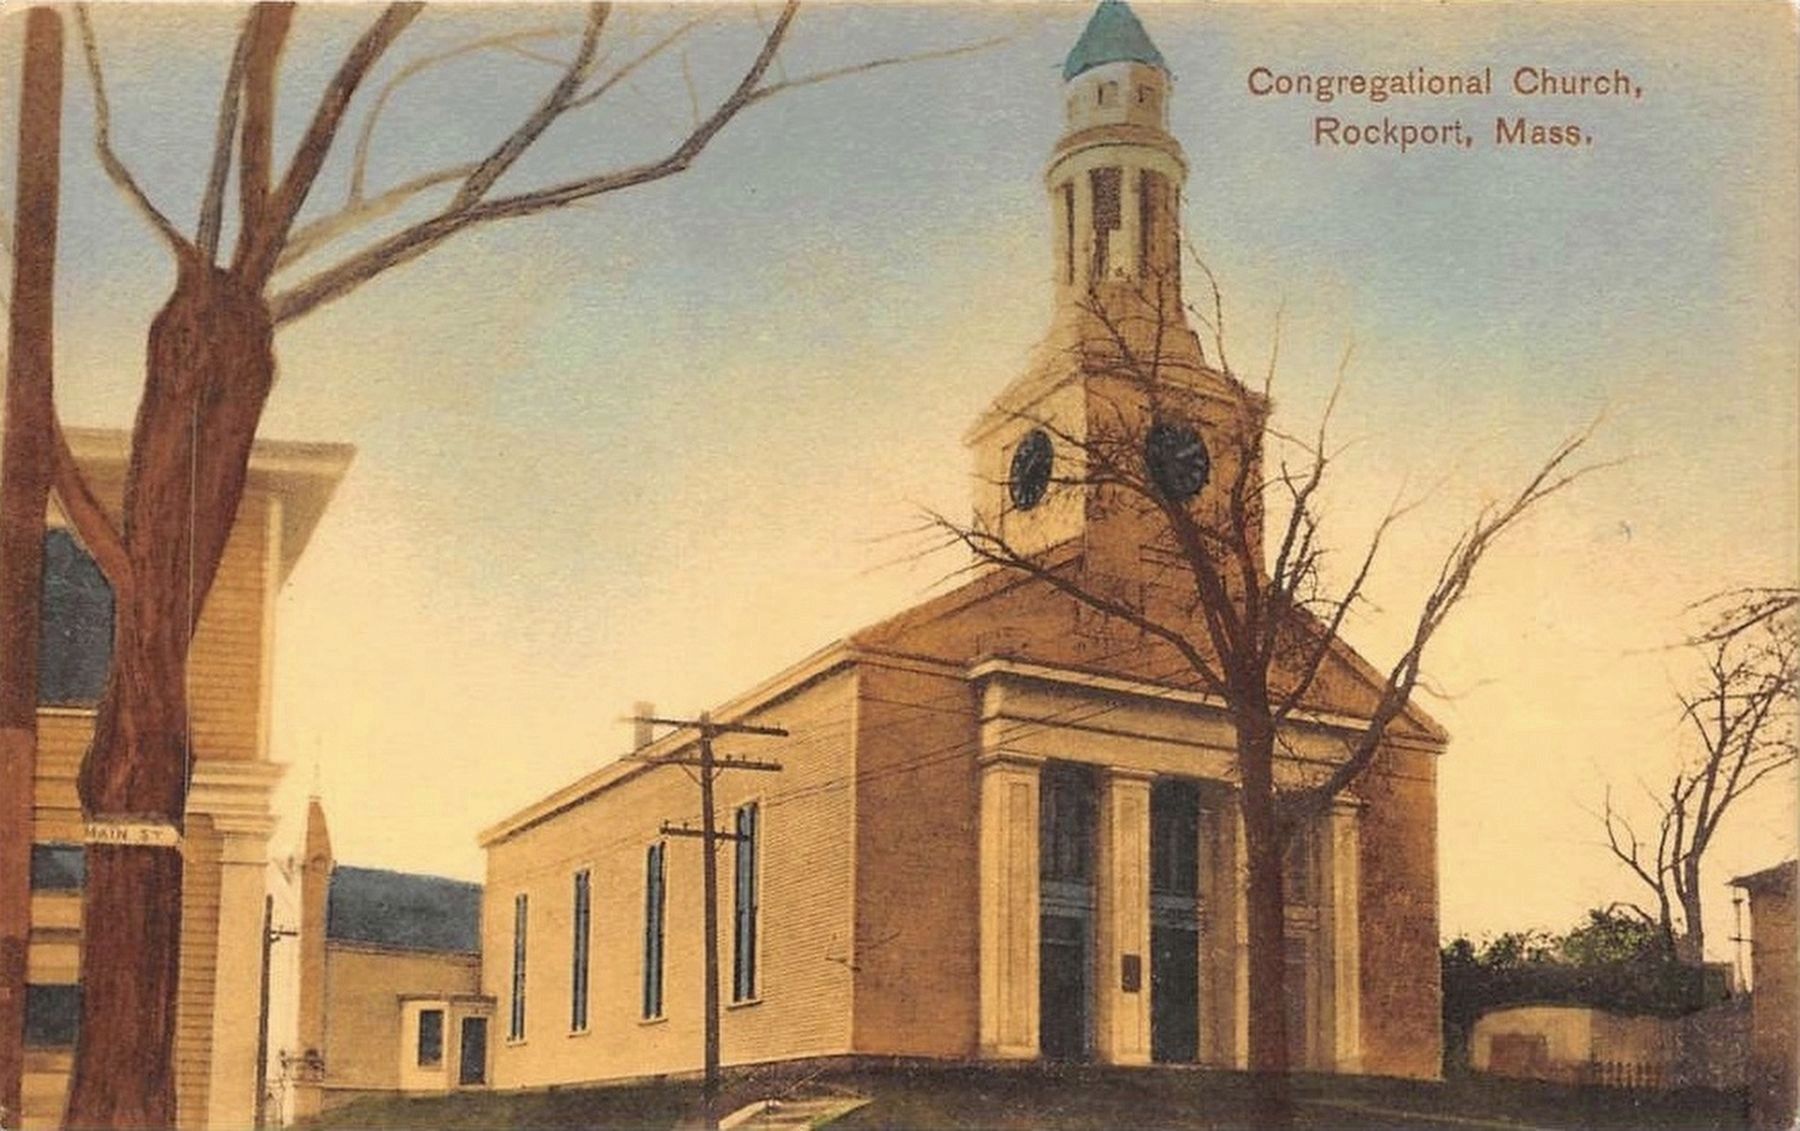 Congregational Church, Rockport, Mass. image. Click for full size.